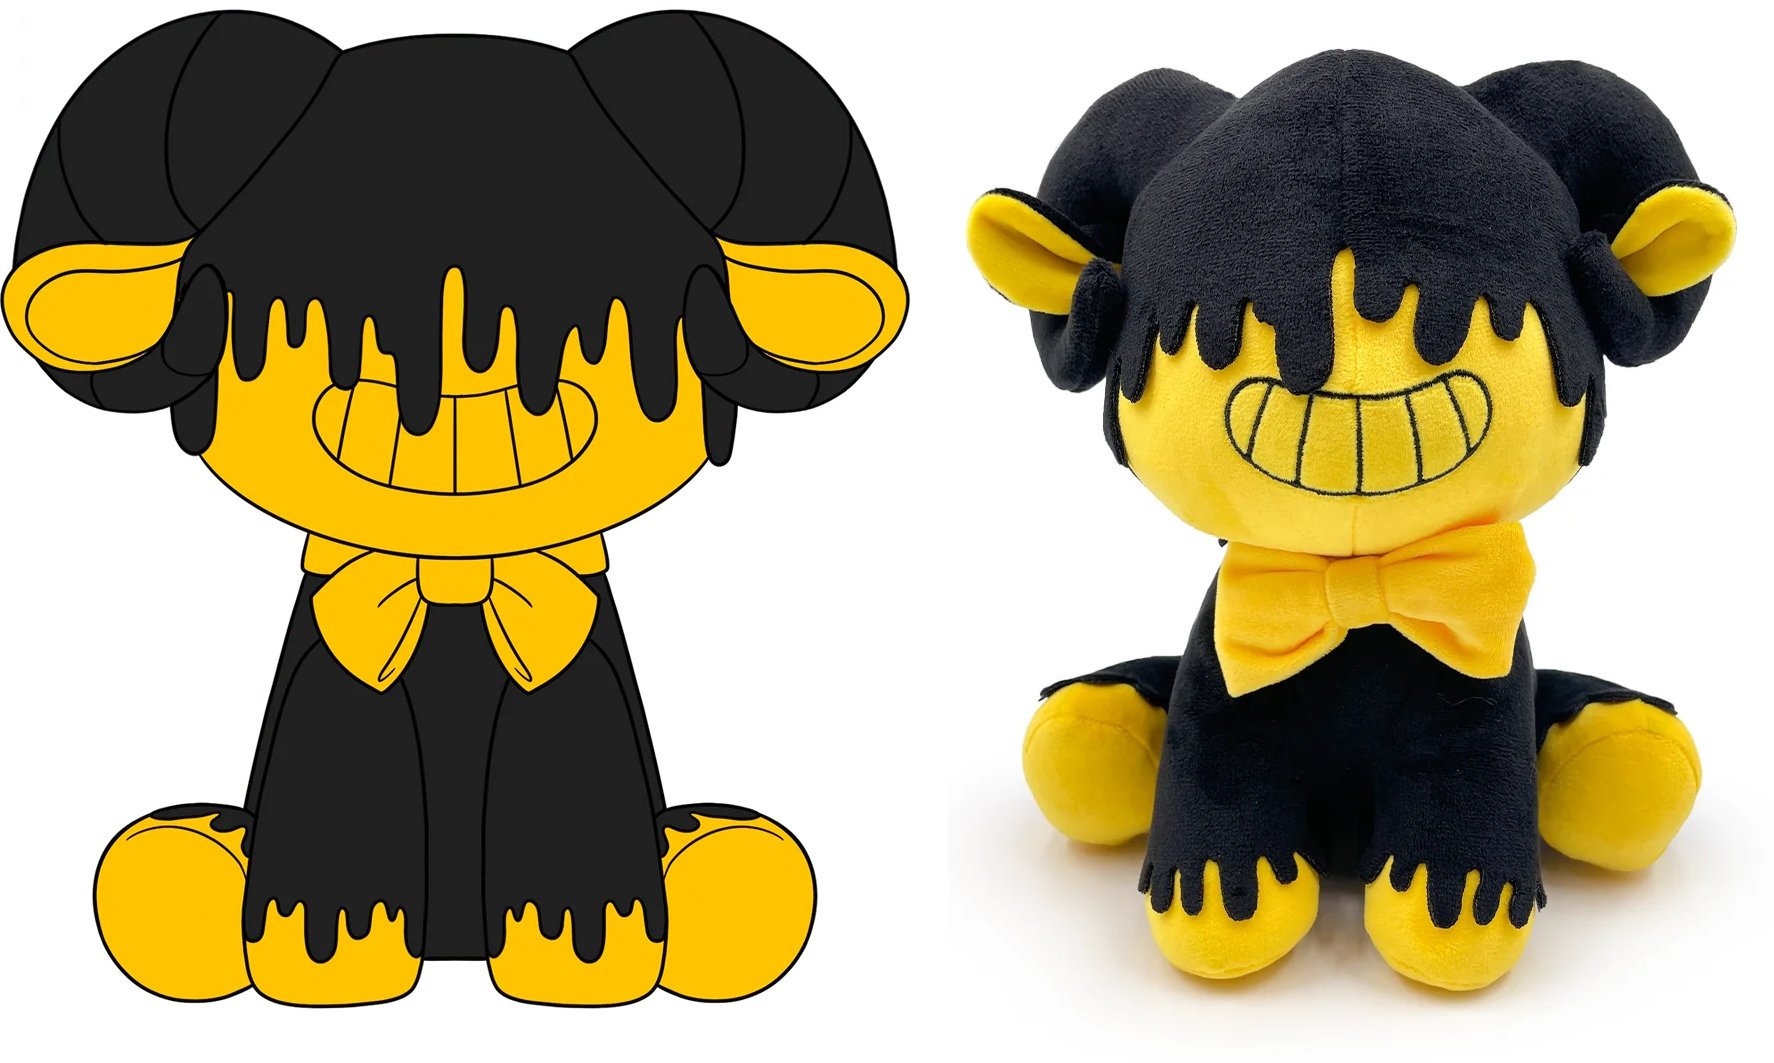 Ink Rammie Plush (9in) – Youtooz Collectibles